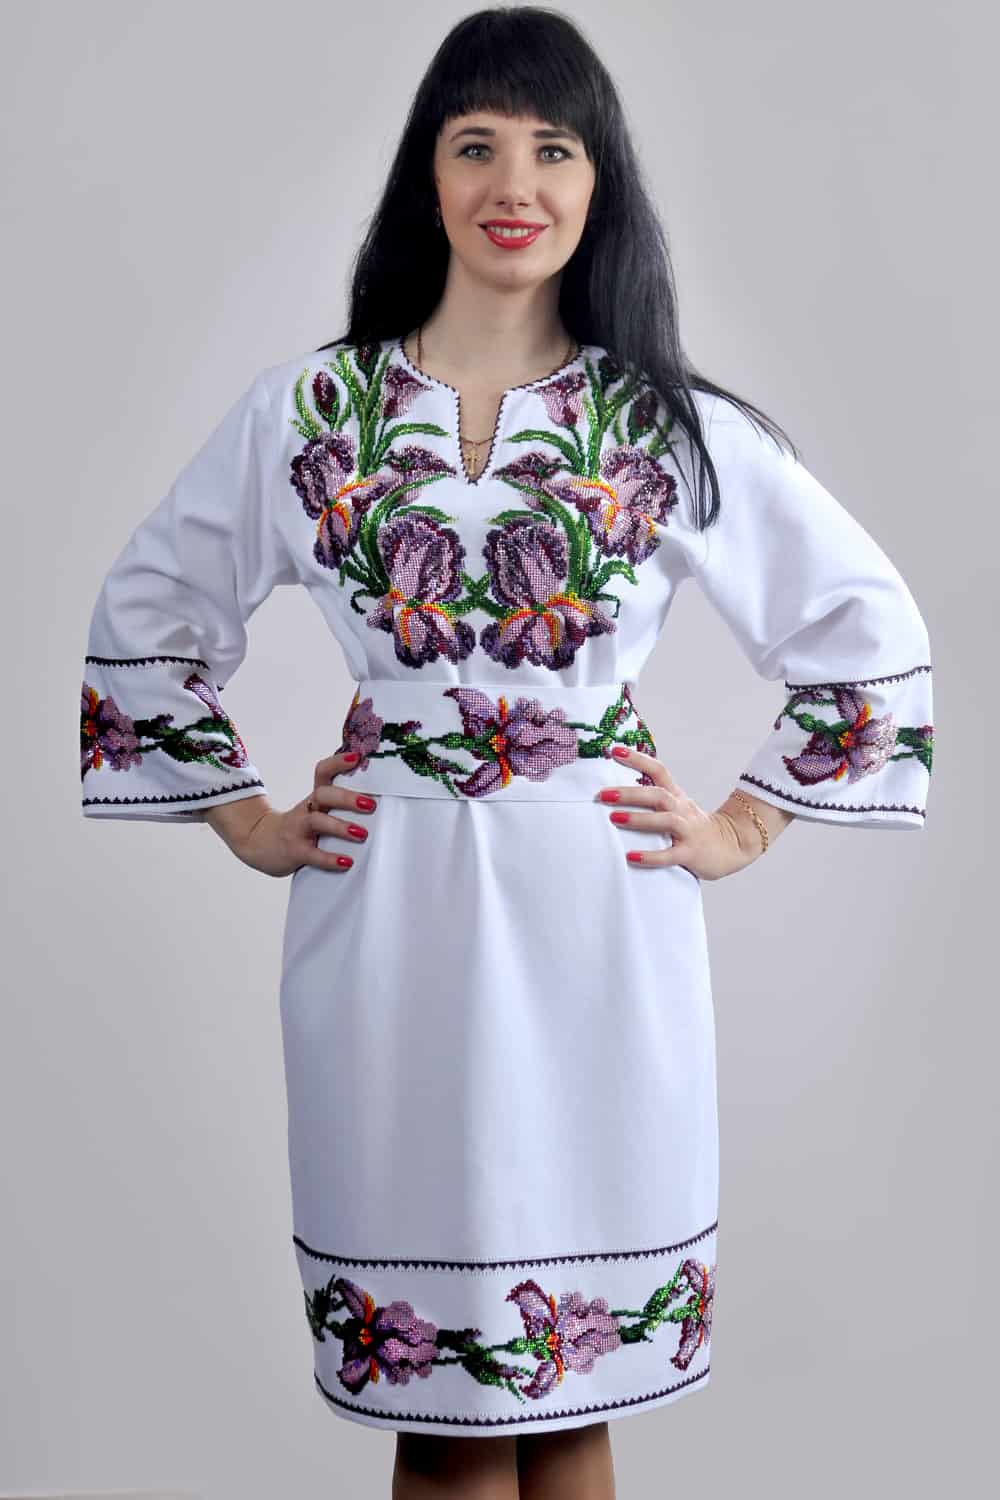 What to wear with white color vyshyvanka dress